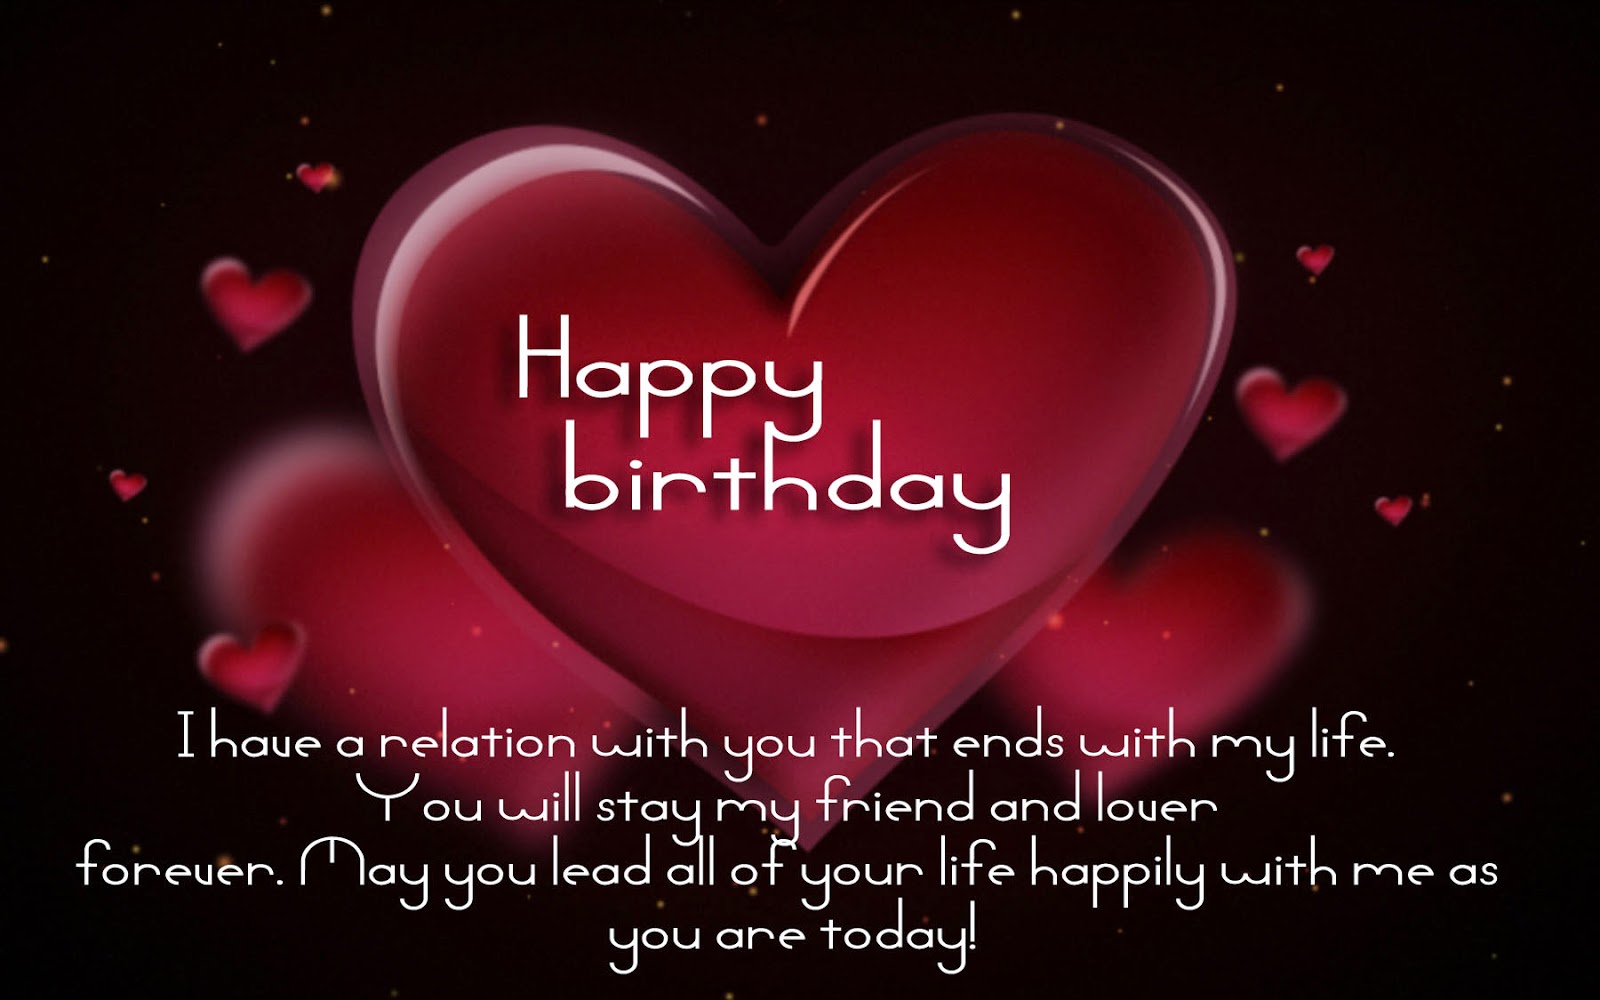 Happy Birthday love quotes, images, poems, messages